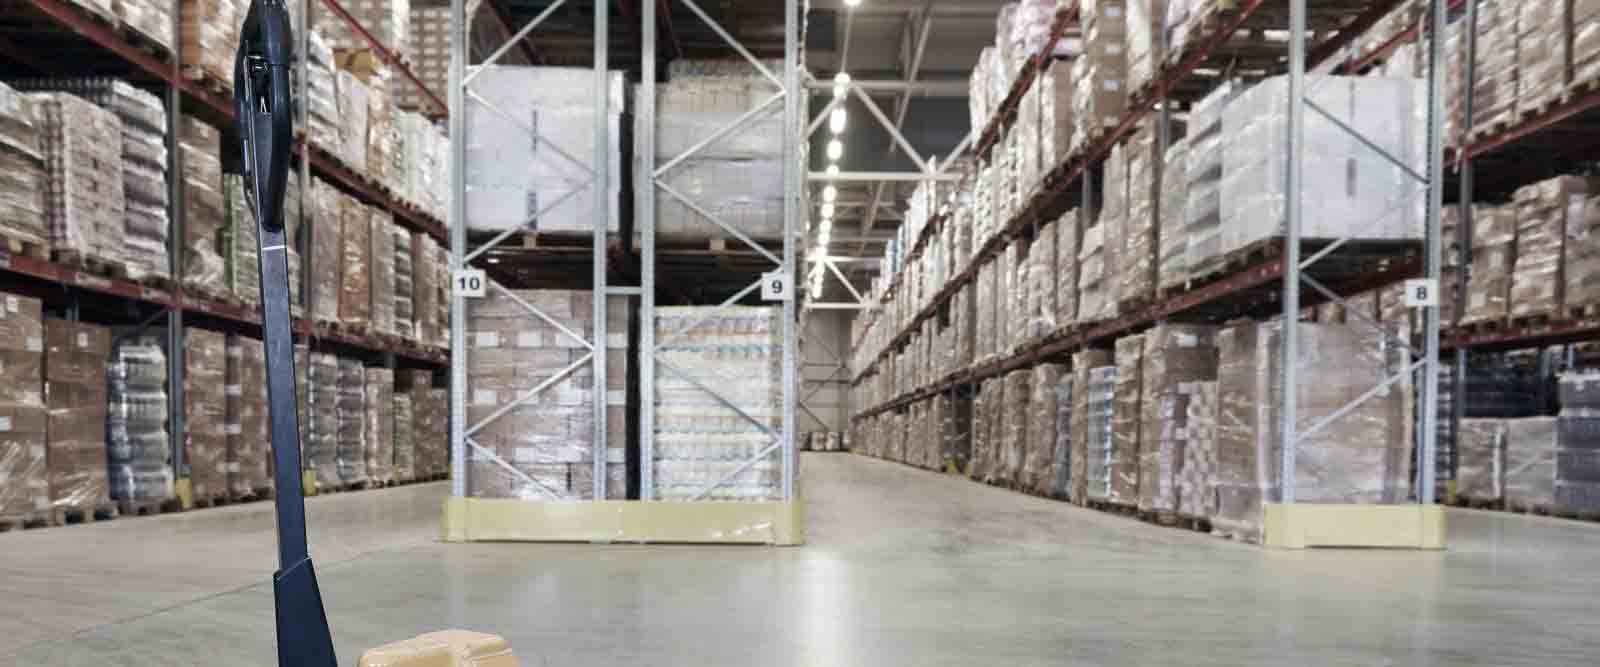 Inventory management solutions